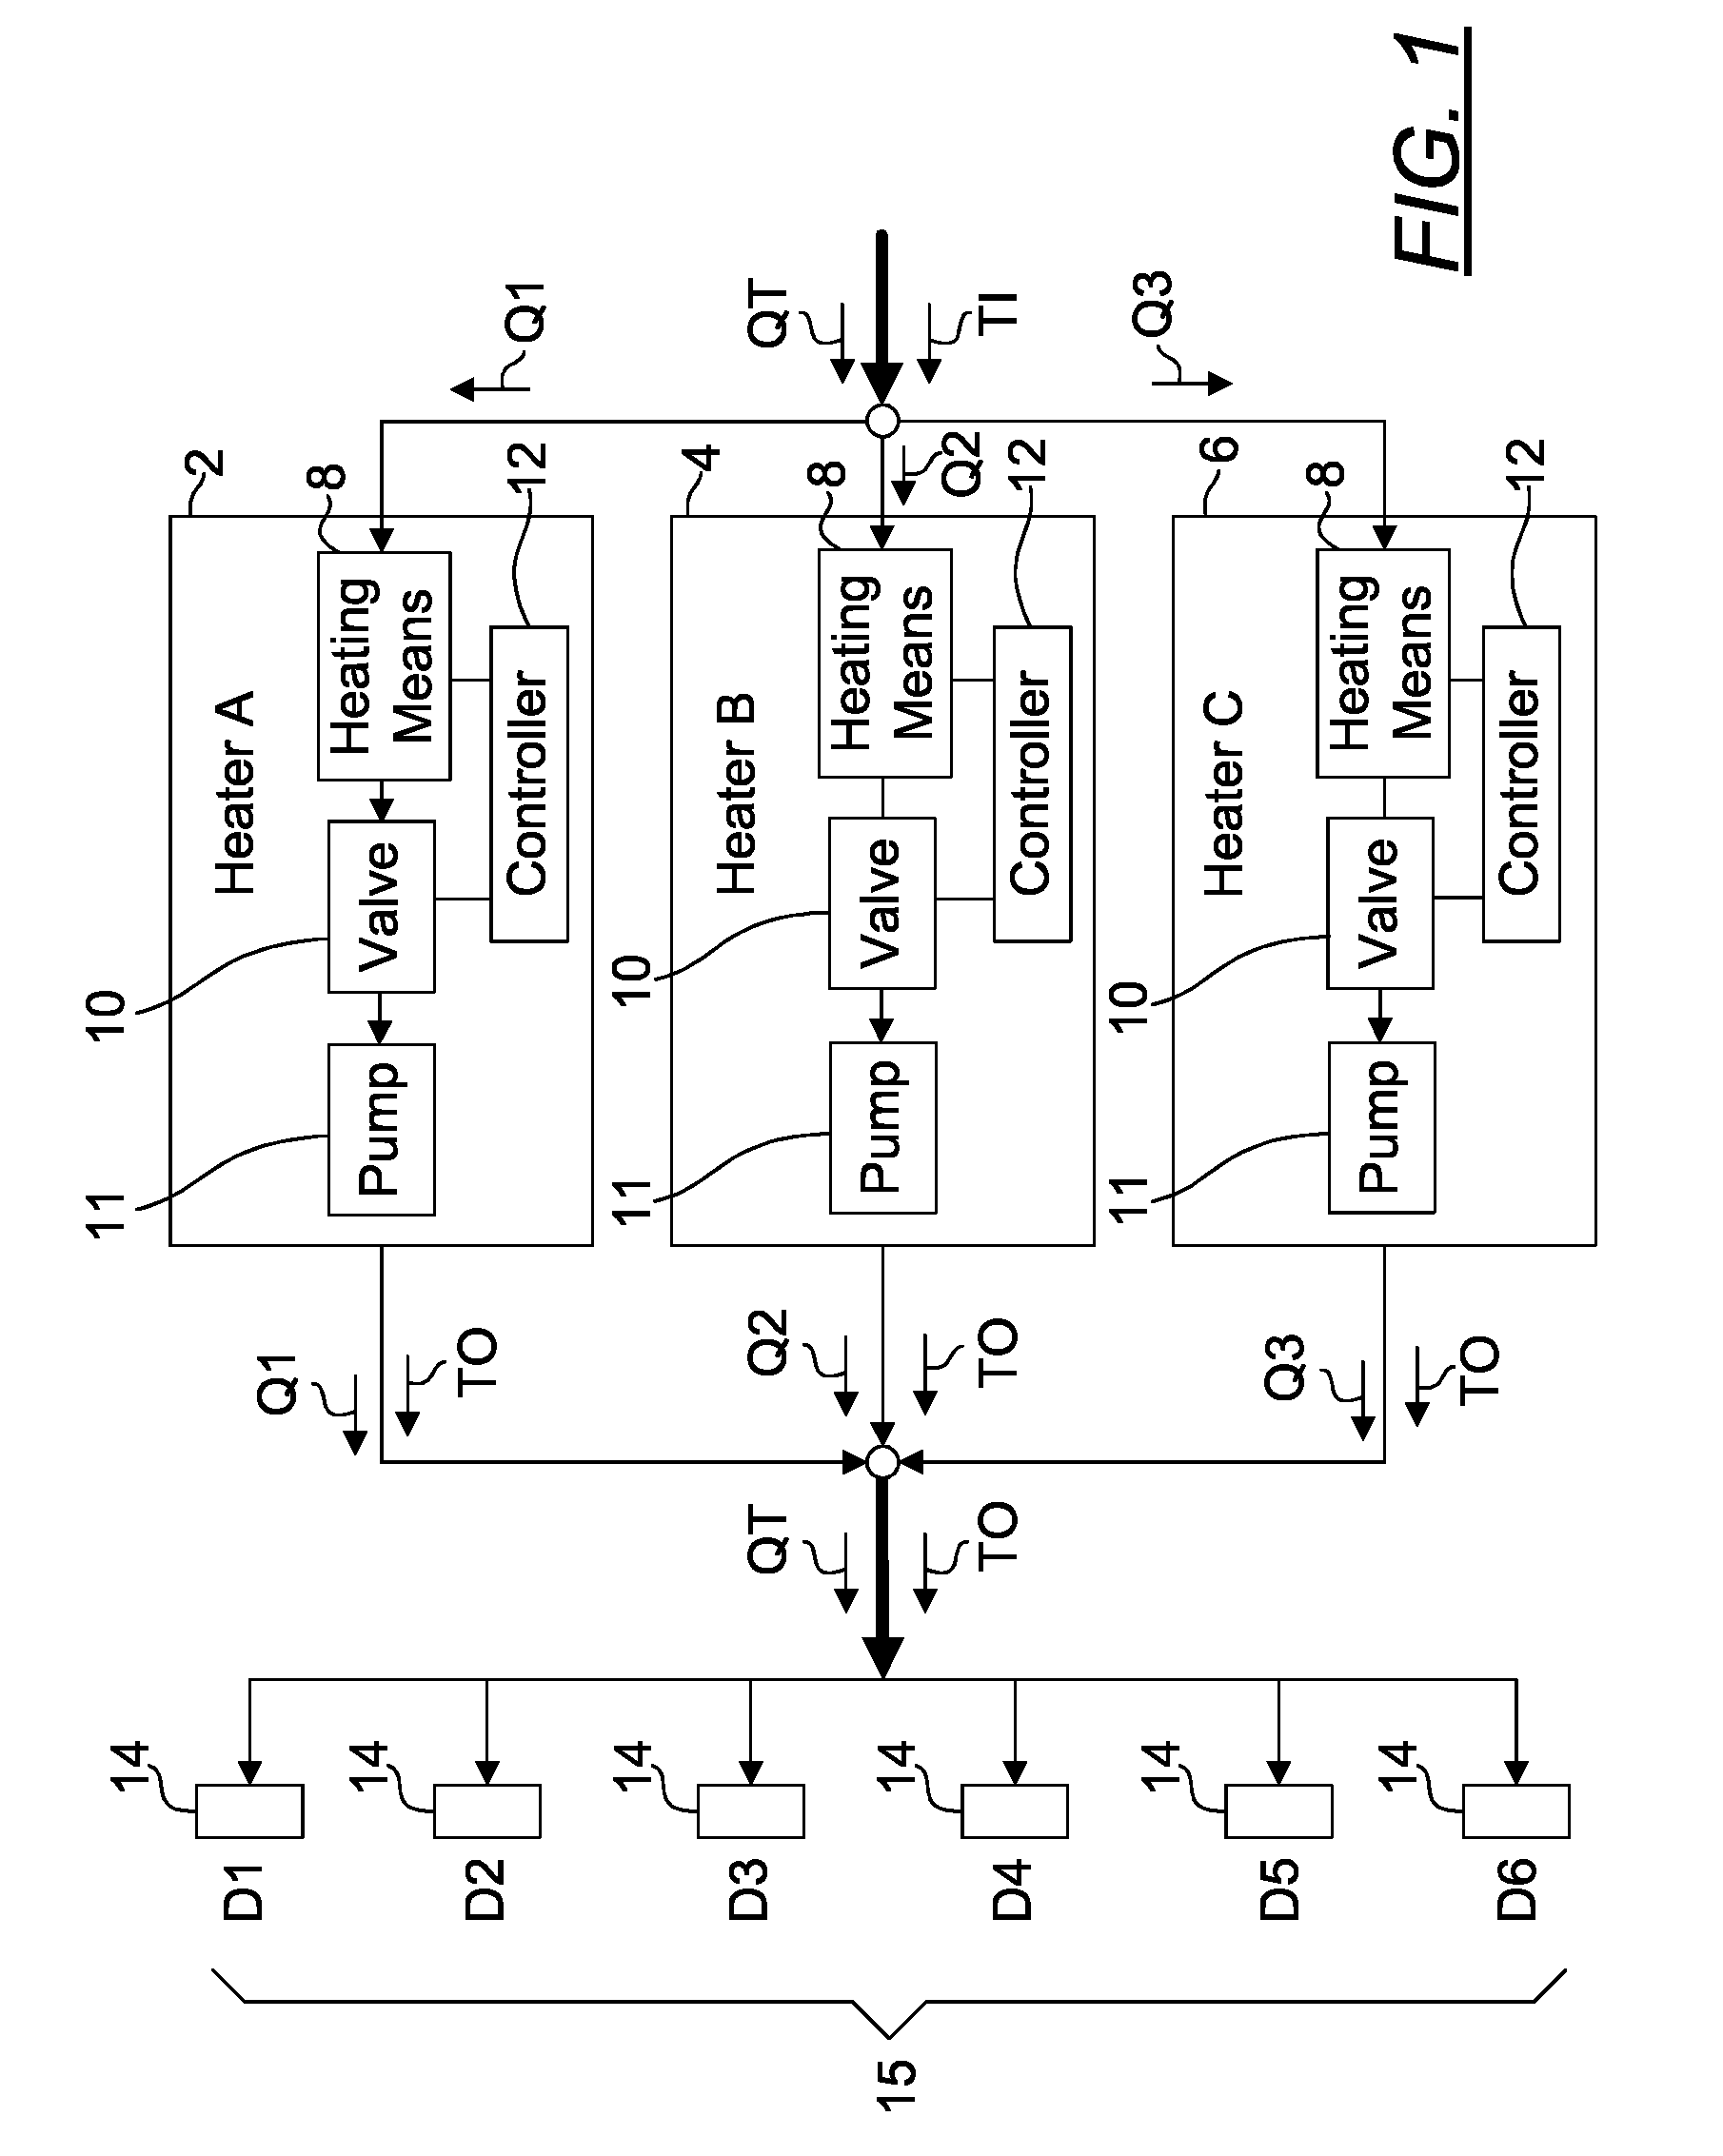 Control system methods for networked water heaters